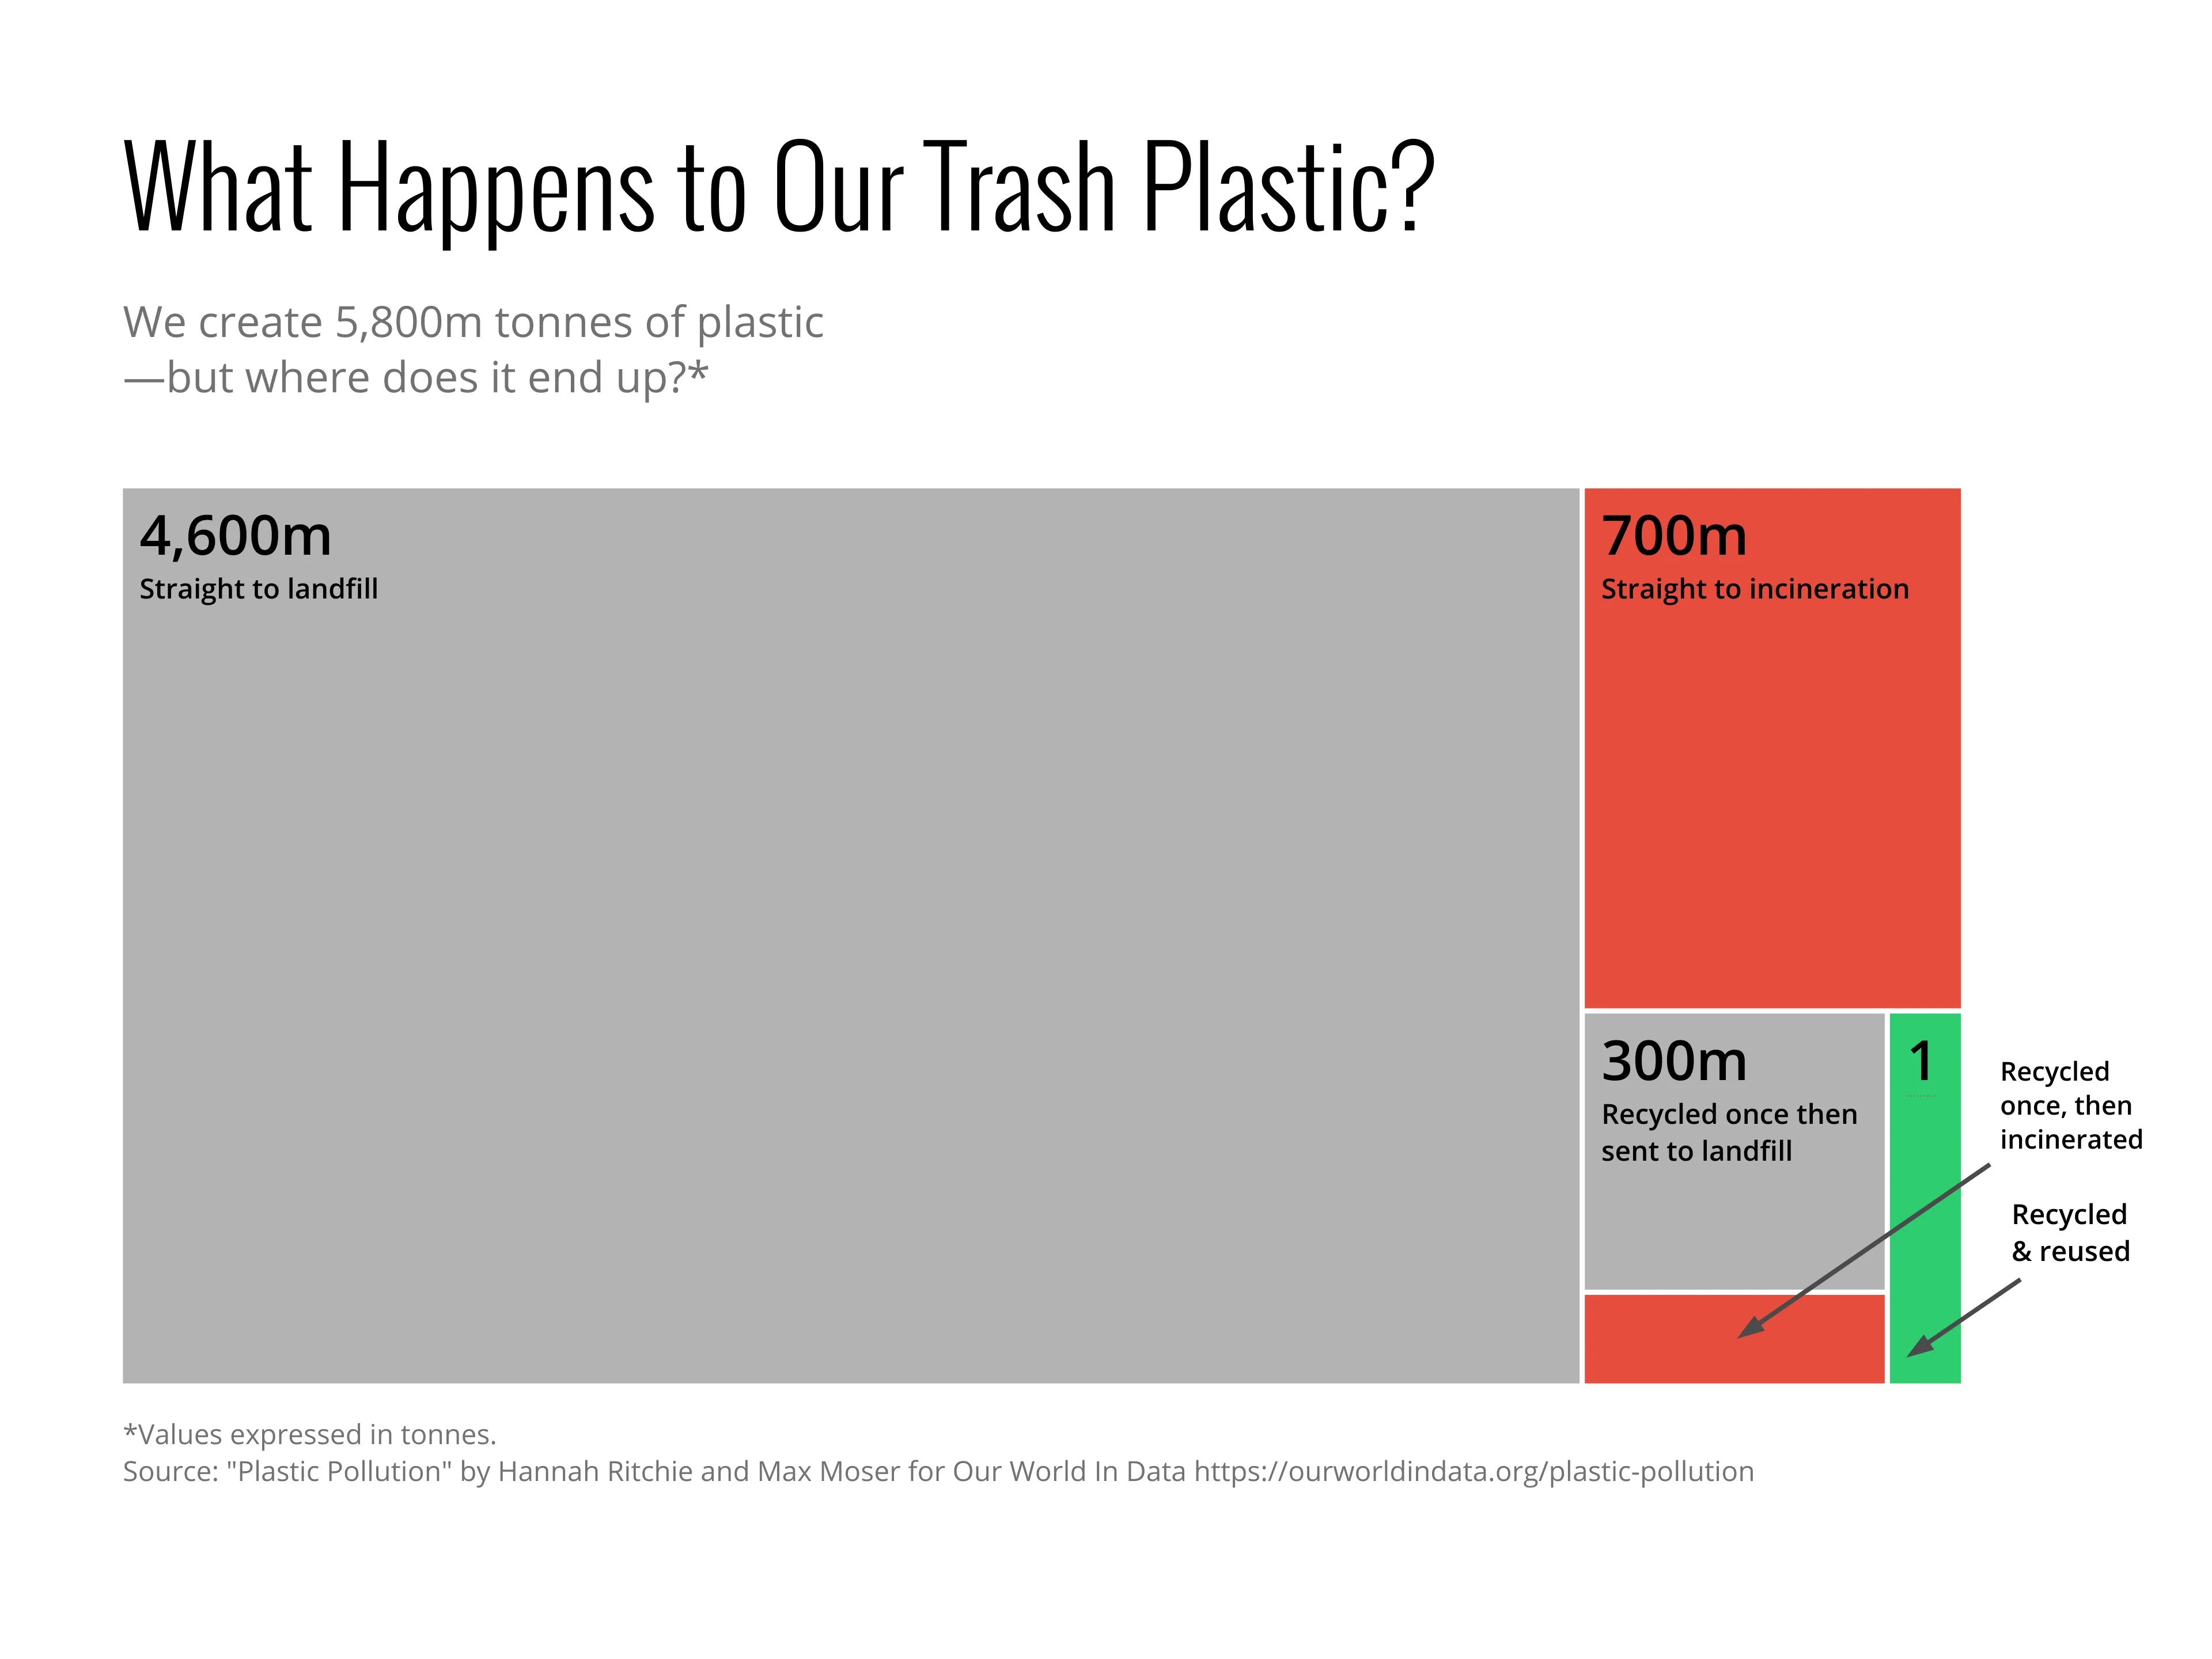 What Happens to Our Trash Plastic?